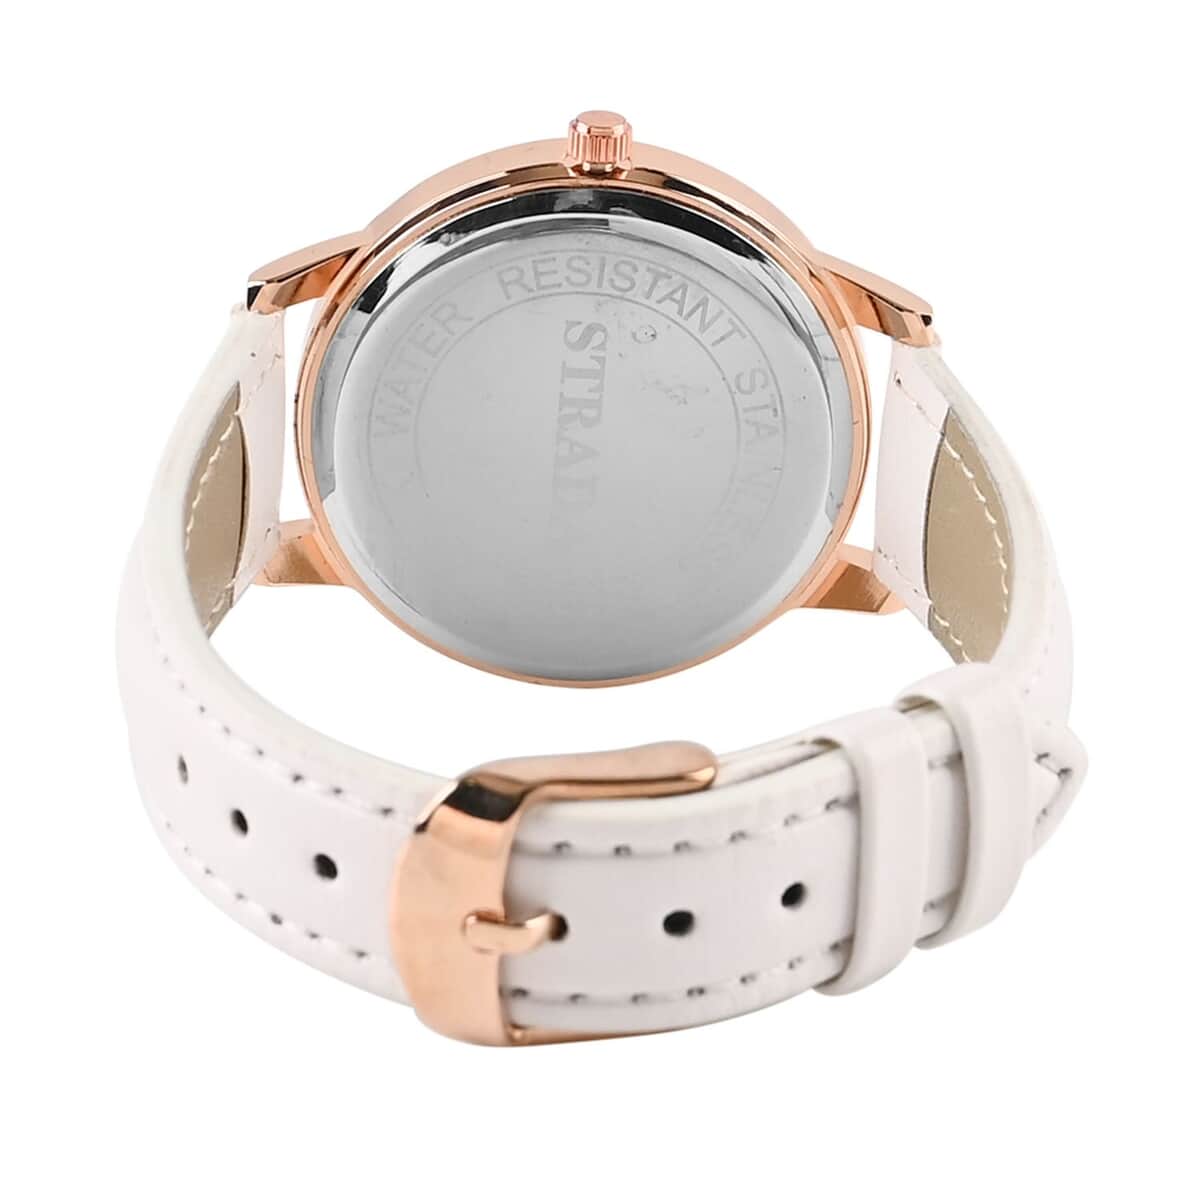 Strada White Austrian Crystal Japanese Movement Watch in Rosetone with White Faux Leather Strap (35.56mm) (6.75-8.5 Inches) image number 6